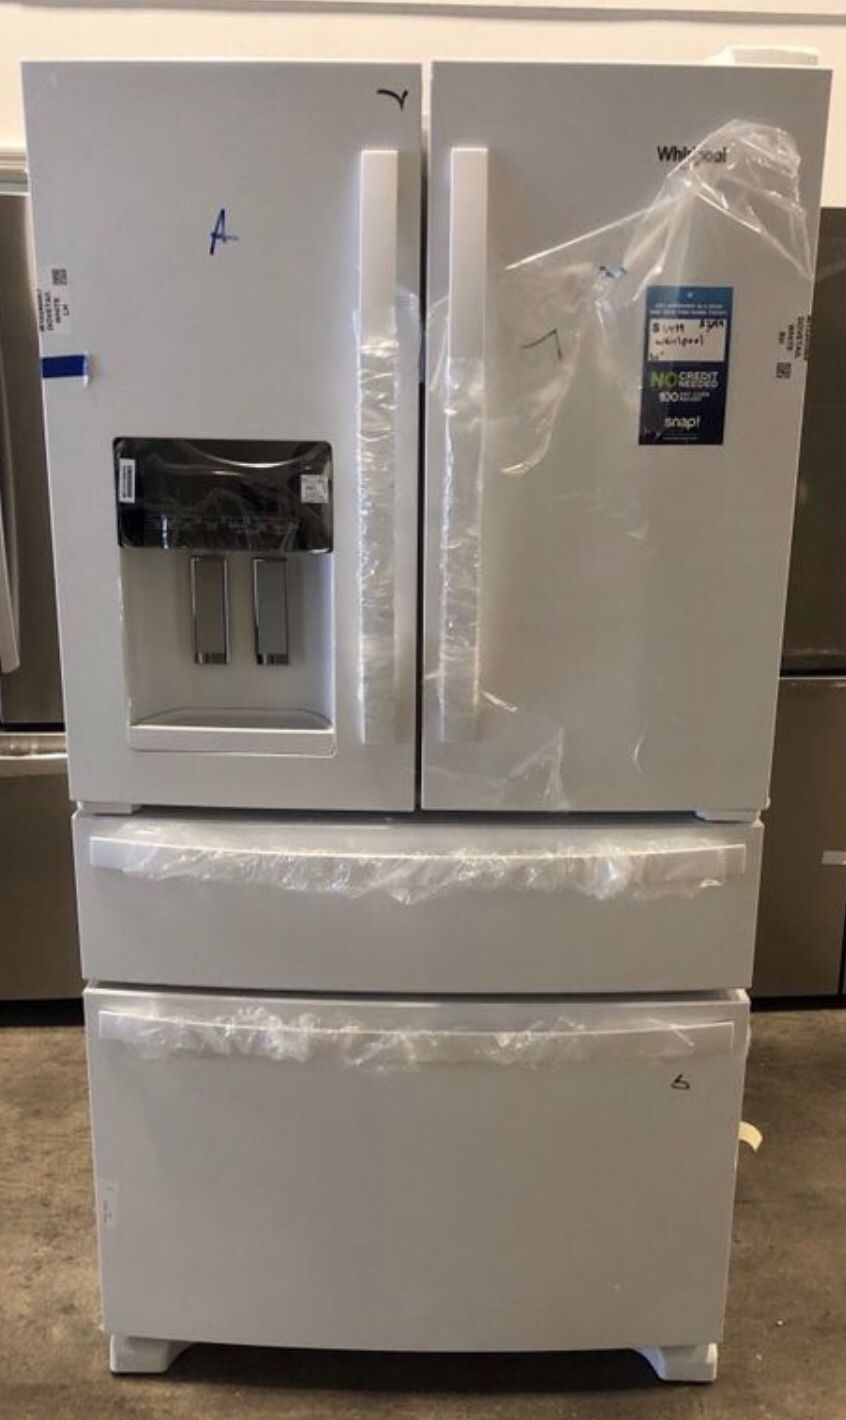 Whirlpool-24.5 cu. Ft. 4 Door French Door Refrigerator take home for $40 EZ financing available with 1 year warranty